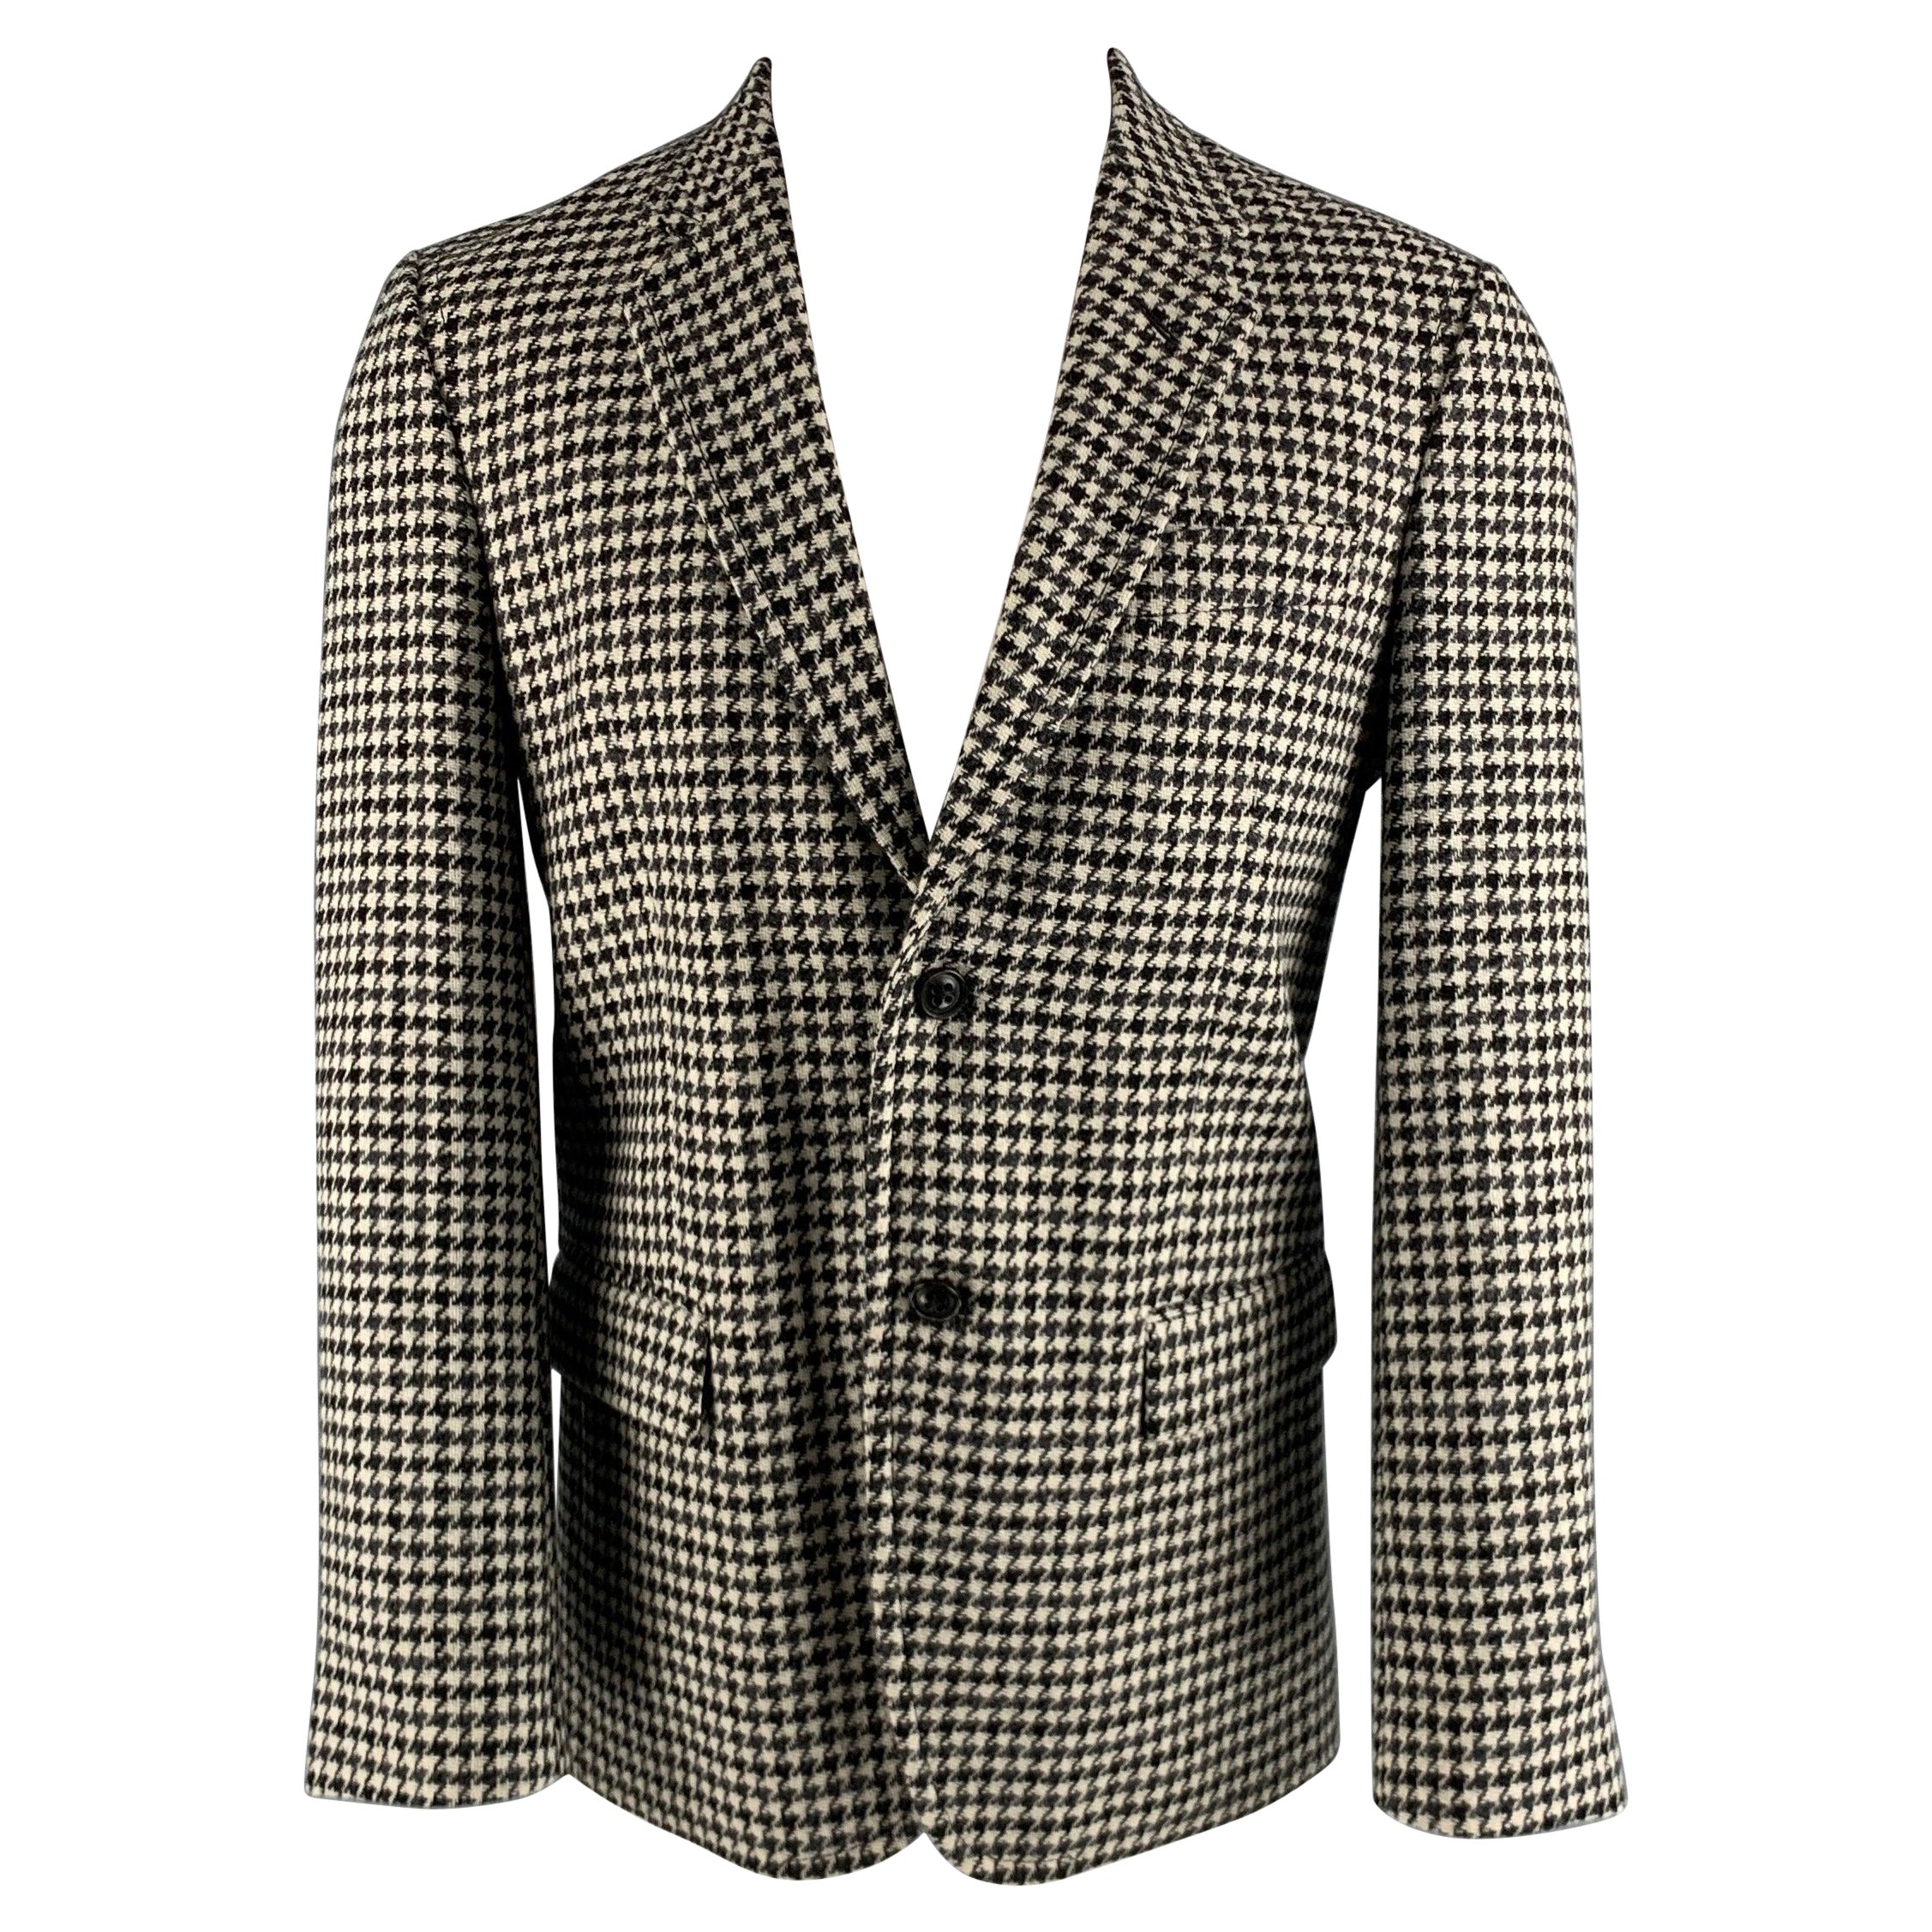 MARC JACOBS Size 38 Black White Houndstooth Wool Notch Lapel Sport Coat For Sale